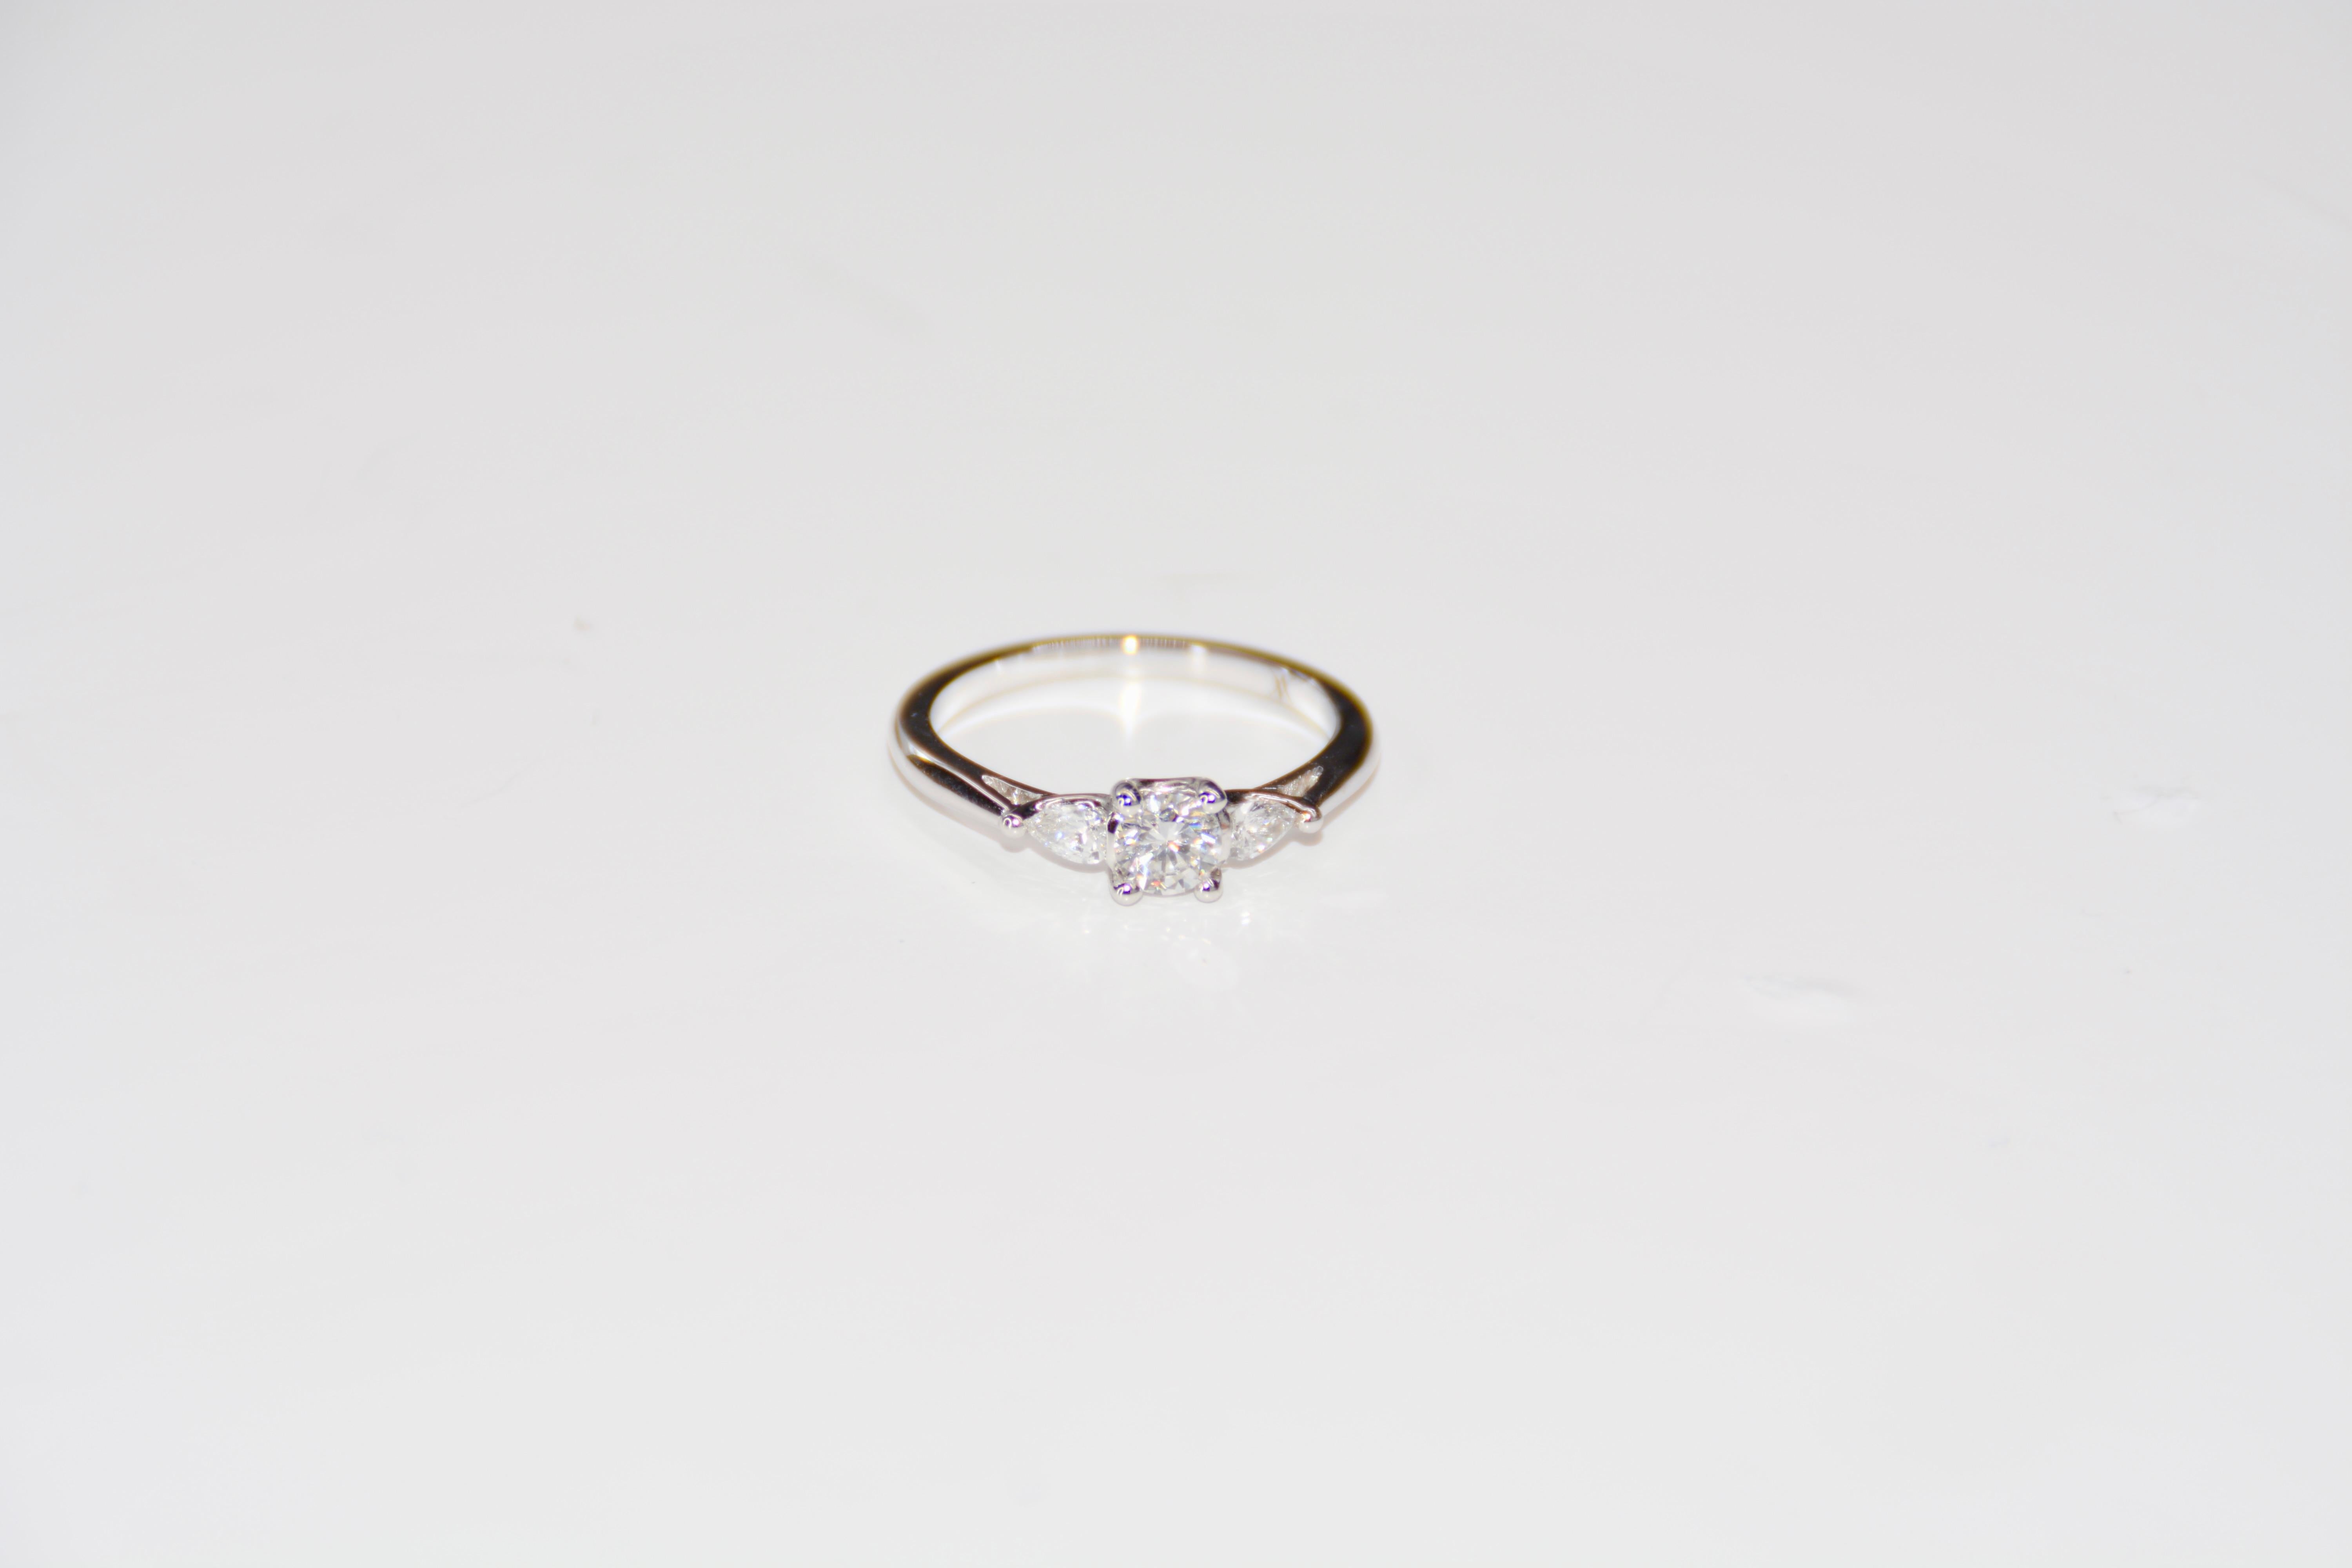 French Engagement Ring White Gold Set with Diamonds

Beautiful solitaire ring in white gold set with 3 diamonds. 1 central brilliant-cut diamond, weighing 0.310 carats, color E, purity VS2. This diamond is surrounded by a pear-shaped diamond of